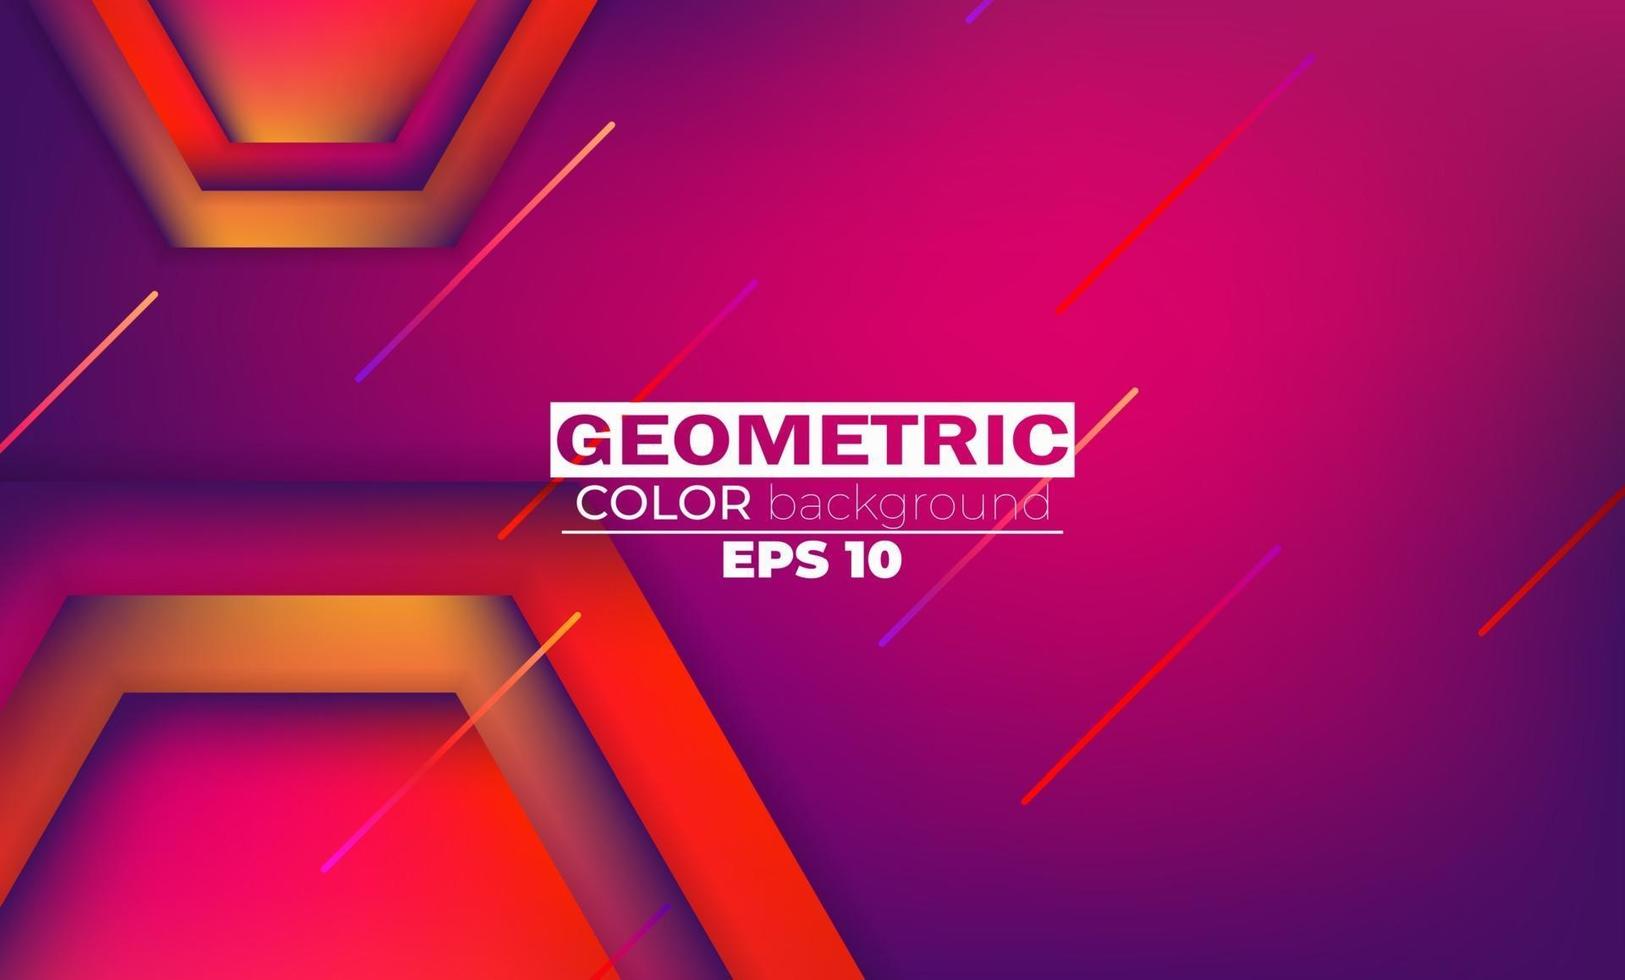 Geometric background with gradient motion shapes composition. Applicable for gift card, poster on wall poster template, landing page, ui, ux ,cover book, banner, social media post vector